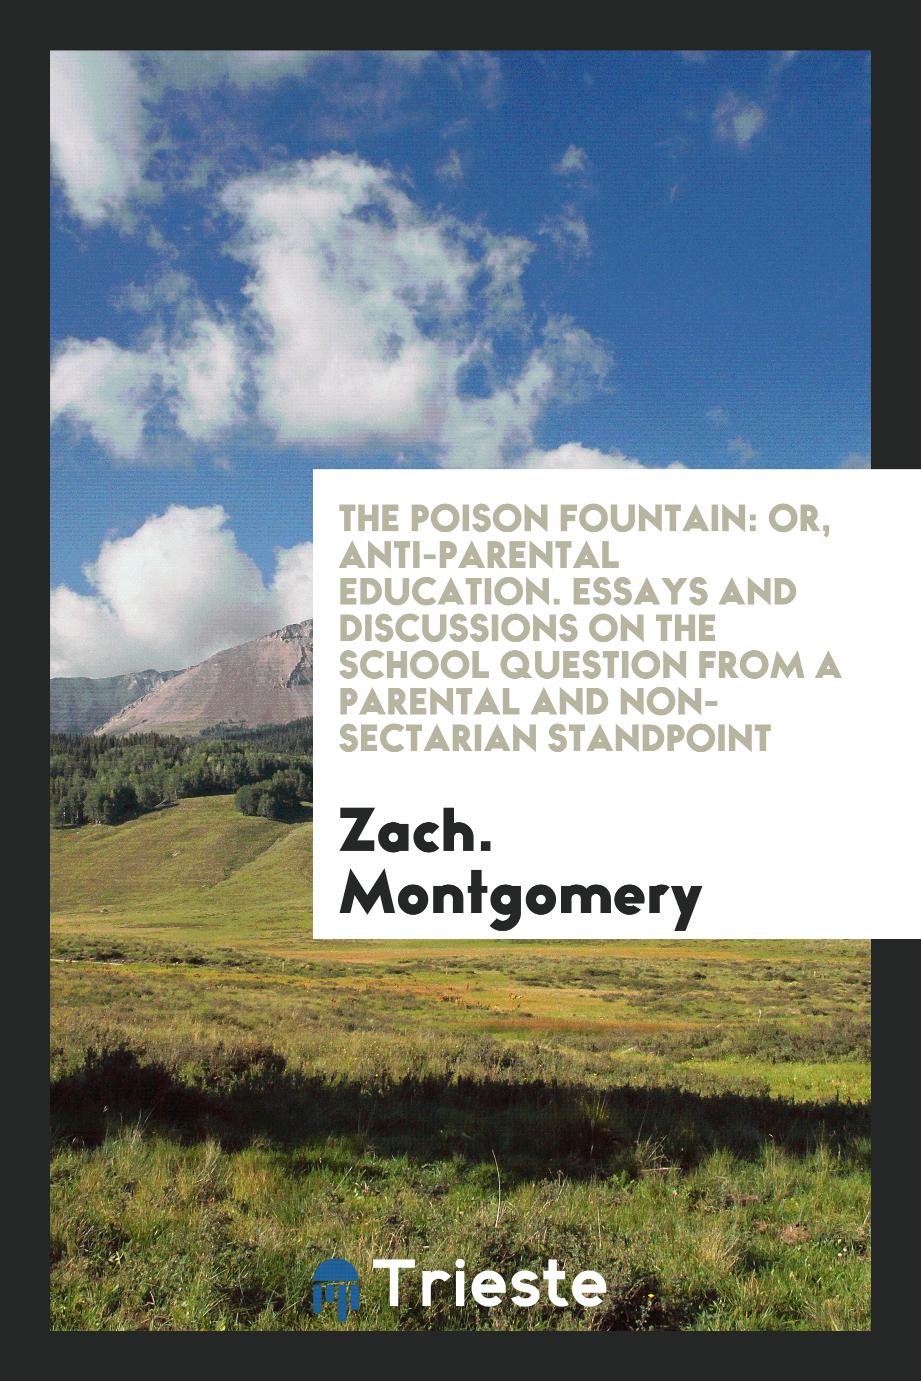 The Poison Fountain: Or, Anti-Parental Education. Essays and Discussions on the School Question from a Parental and Non-Sectarian Standpoint